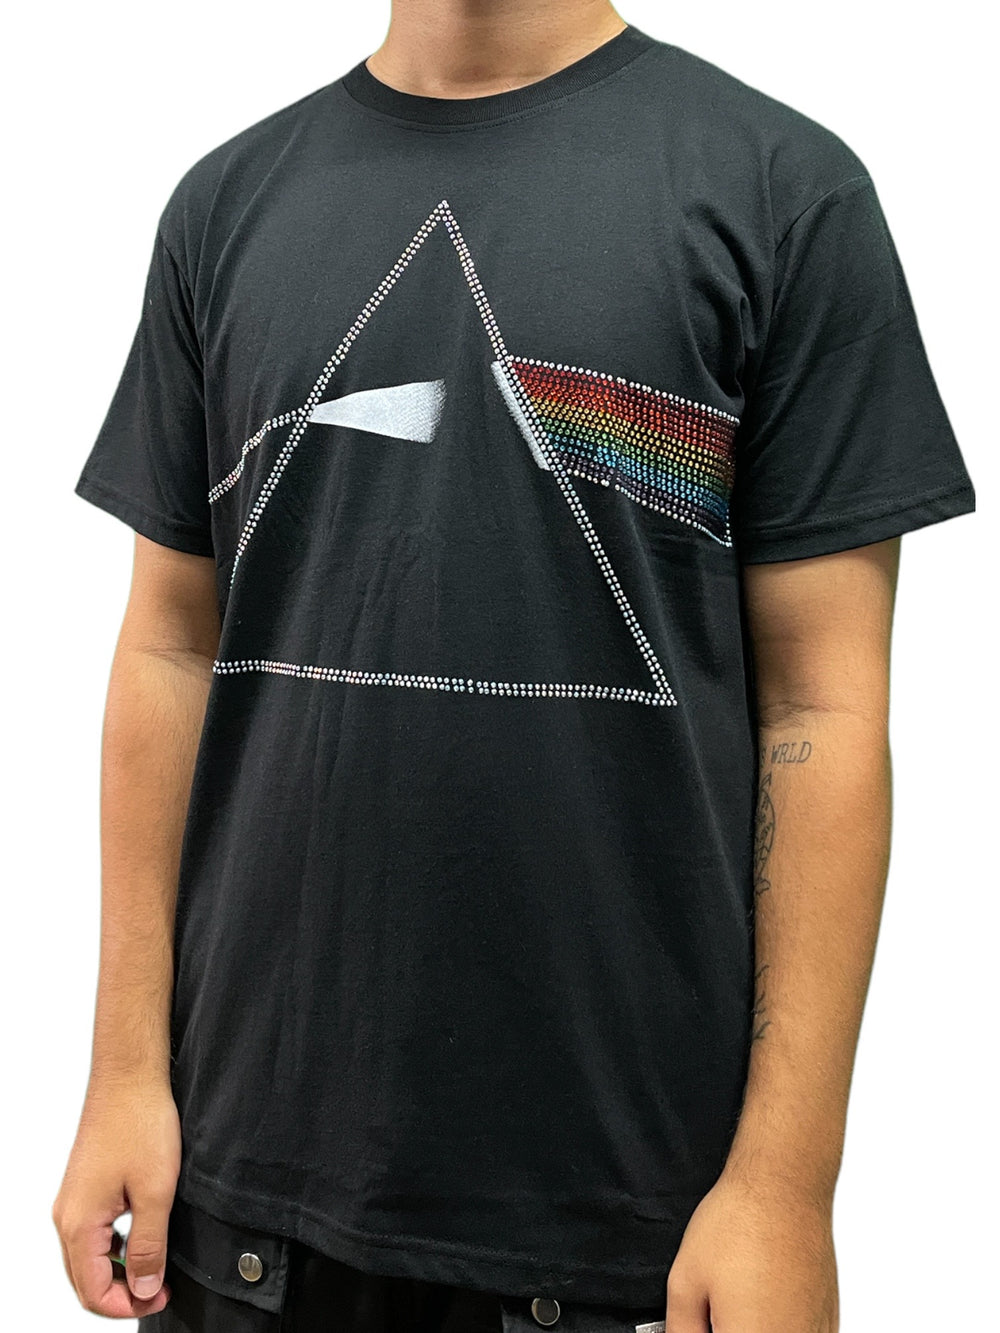 Pink Floyd Embellished Logo Unisex Official T Shirt Brand New Various Sizes